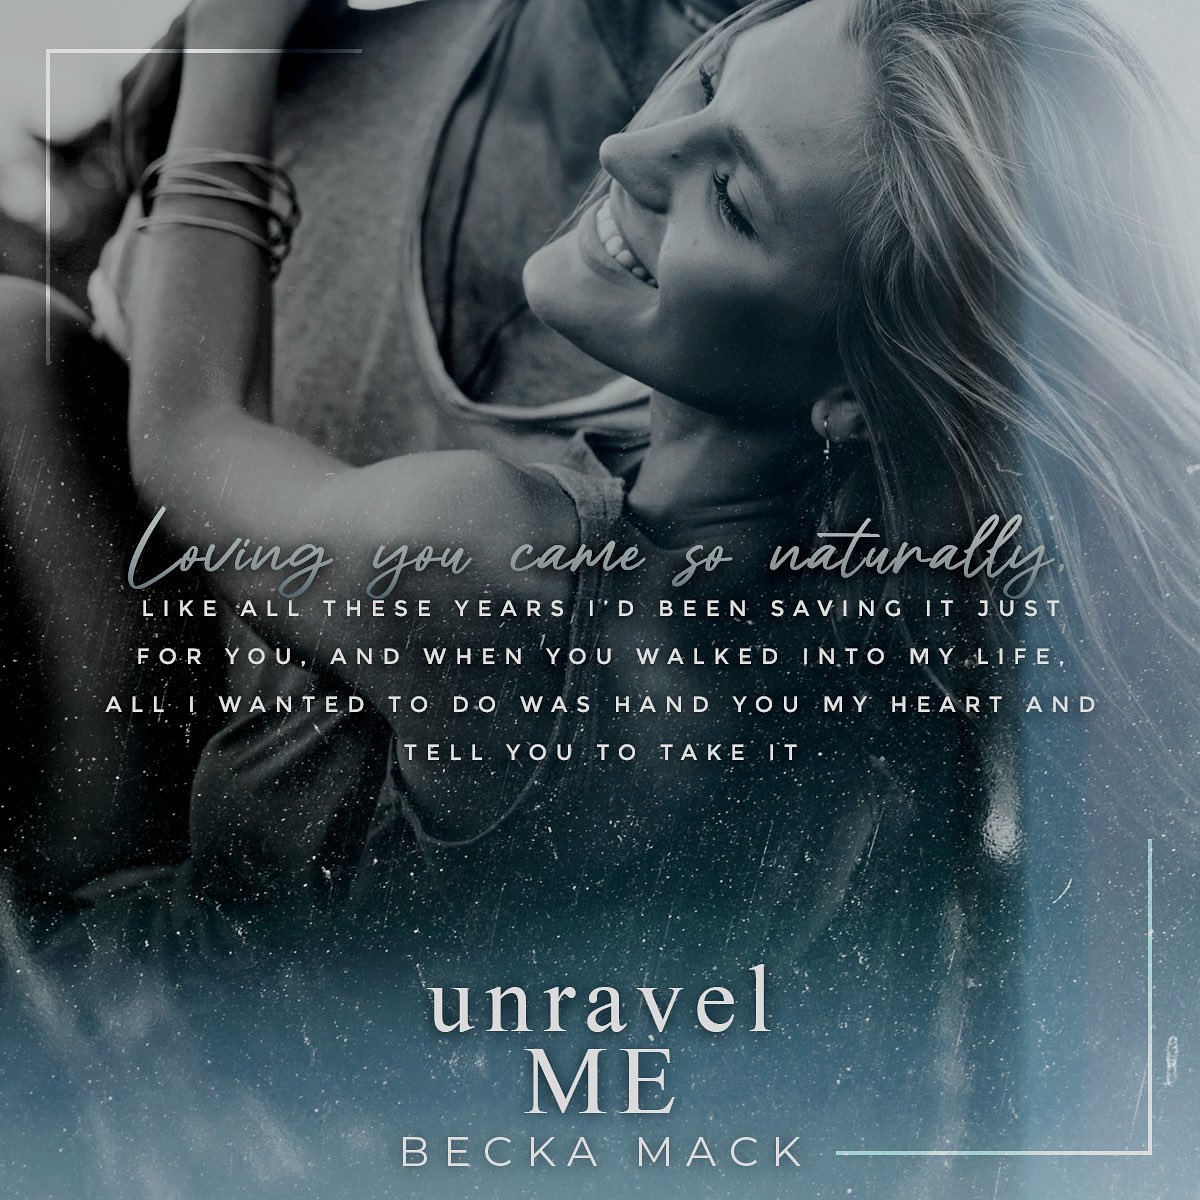 𝐔𝐧𝐫𝐚𝐯𝐞𝐥 𝐌𝐞 by Becka Mack is coming soon! Don’t forget to add this steamy hockey romance to your TBR!
📚Add to Goodreads: goodreads.com/book/show/9660…

#hockeyromance #beckamack #TeaserTuesday